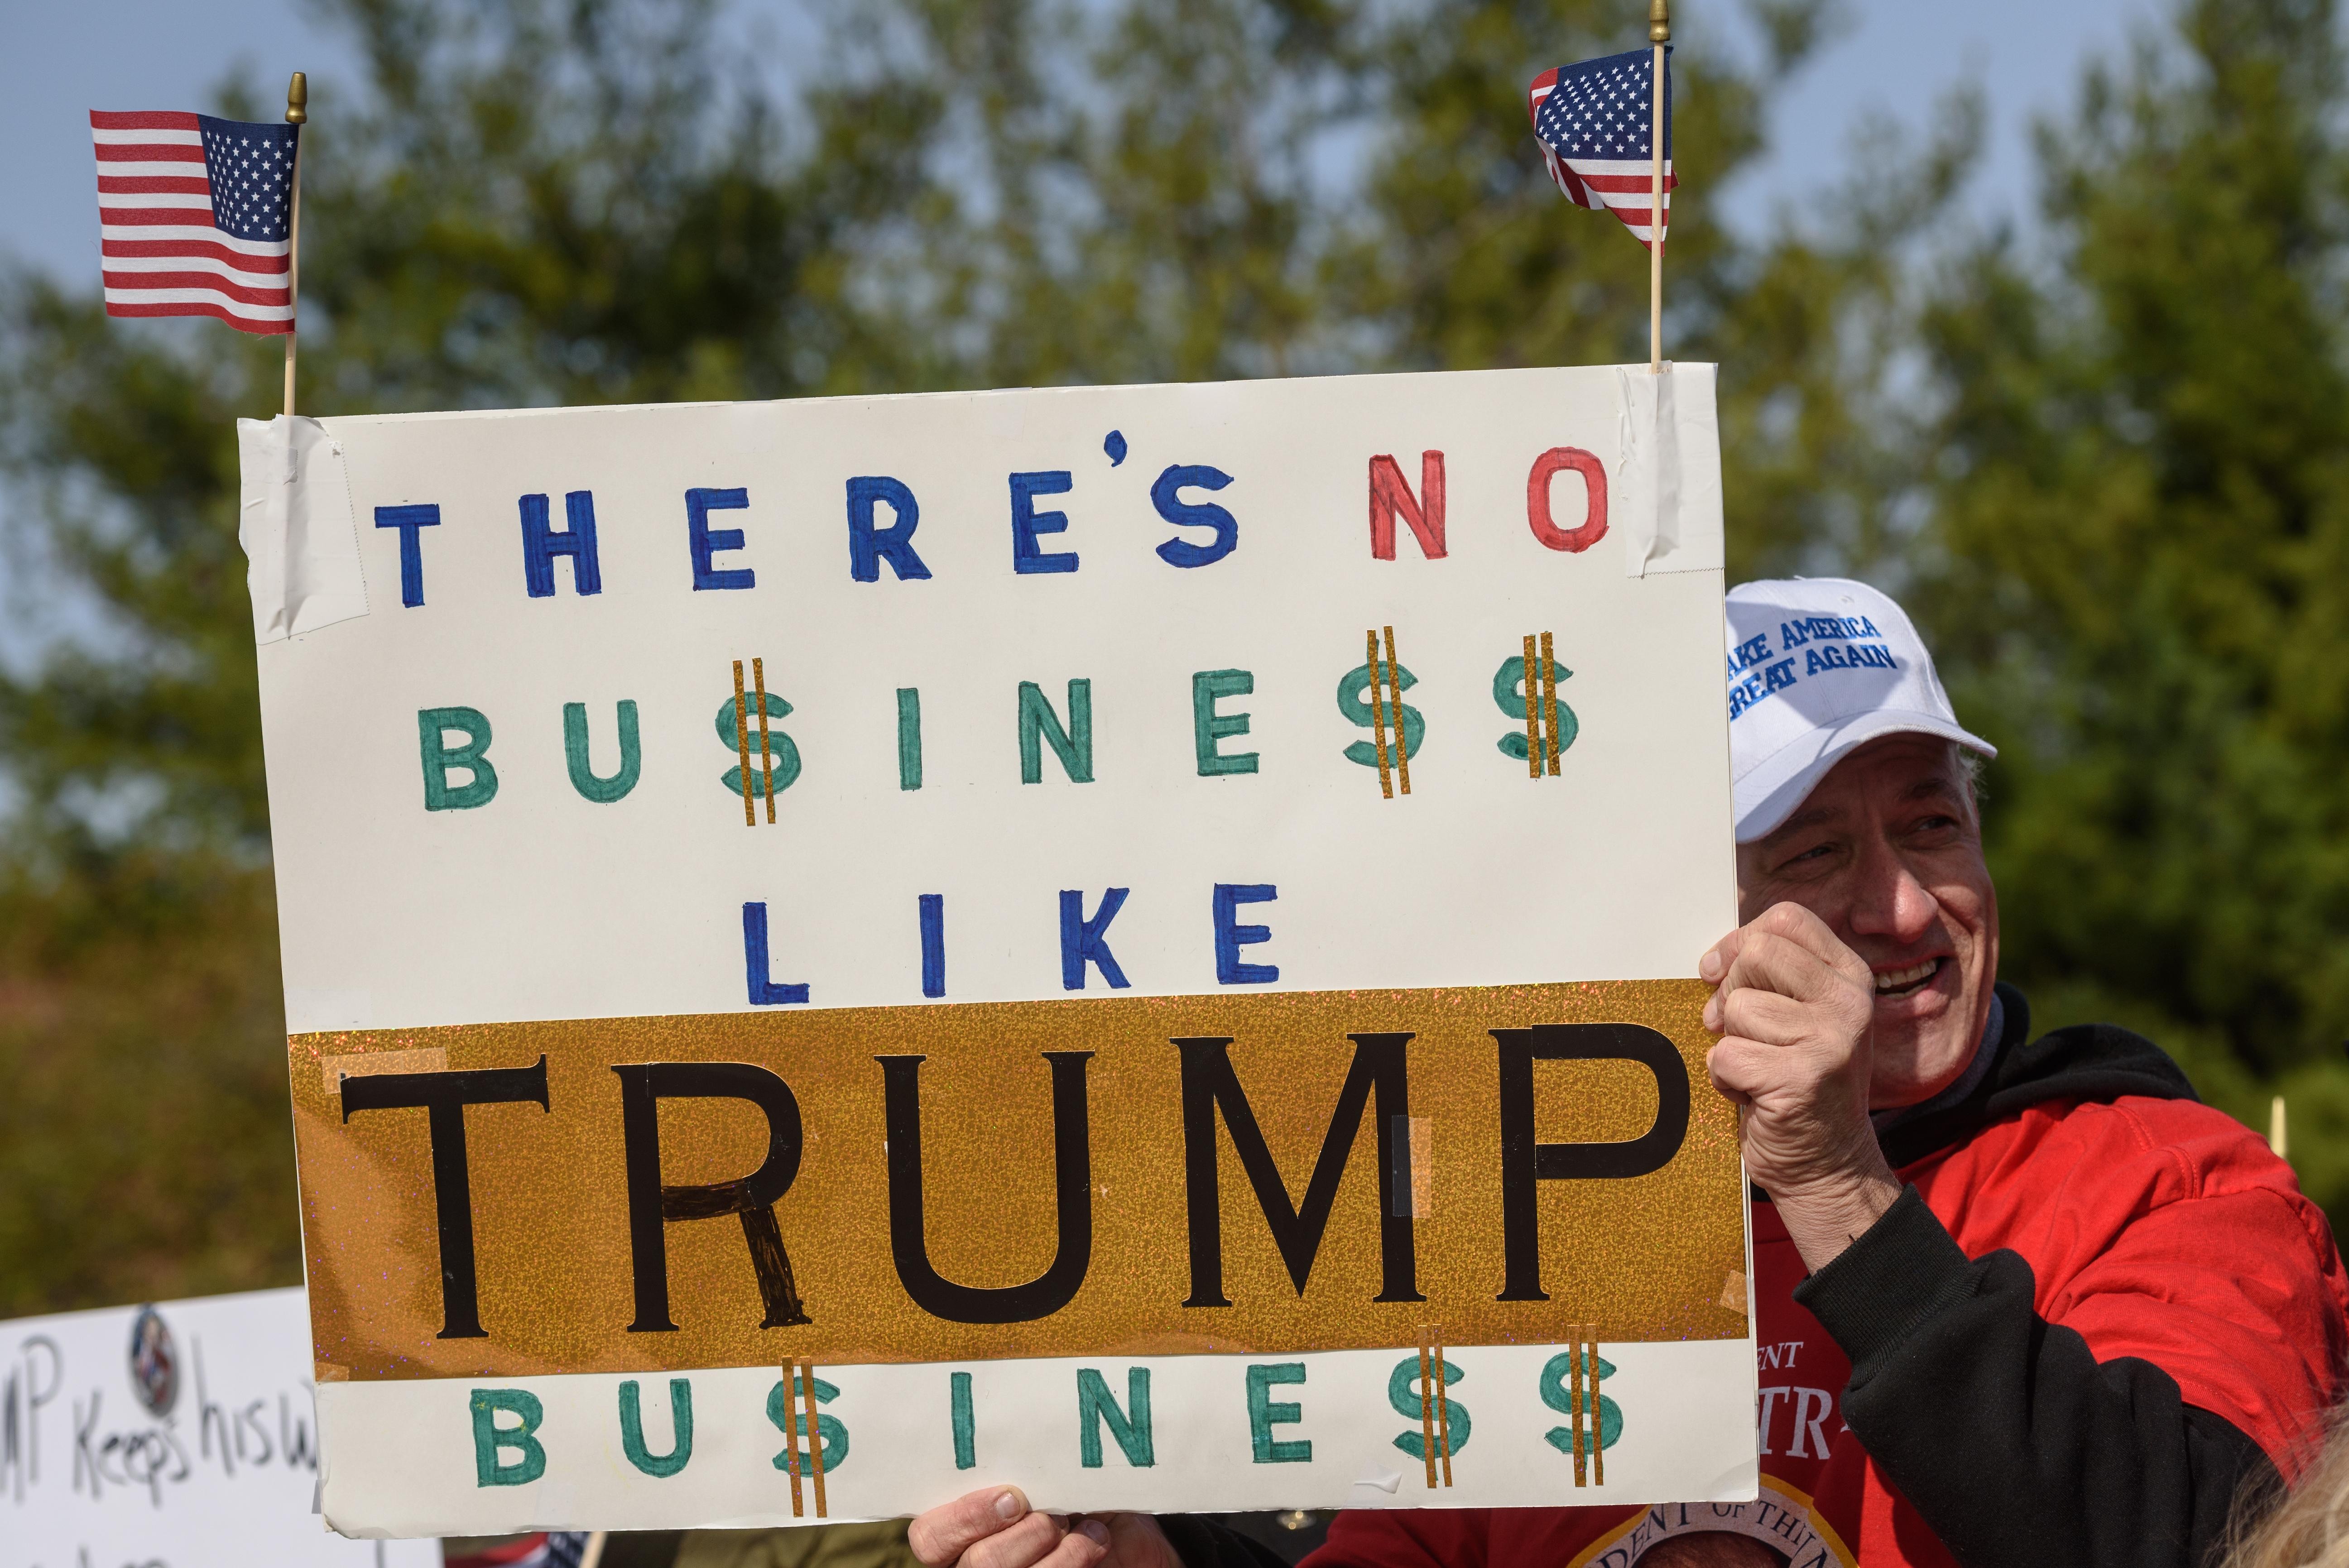 Trump supporter Mike Payne displays his sign. - BRIAN BOHANNON